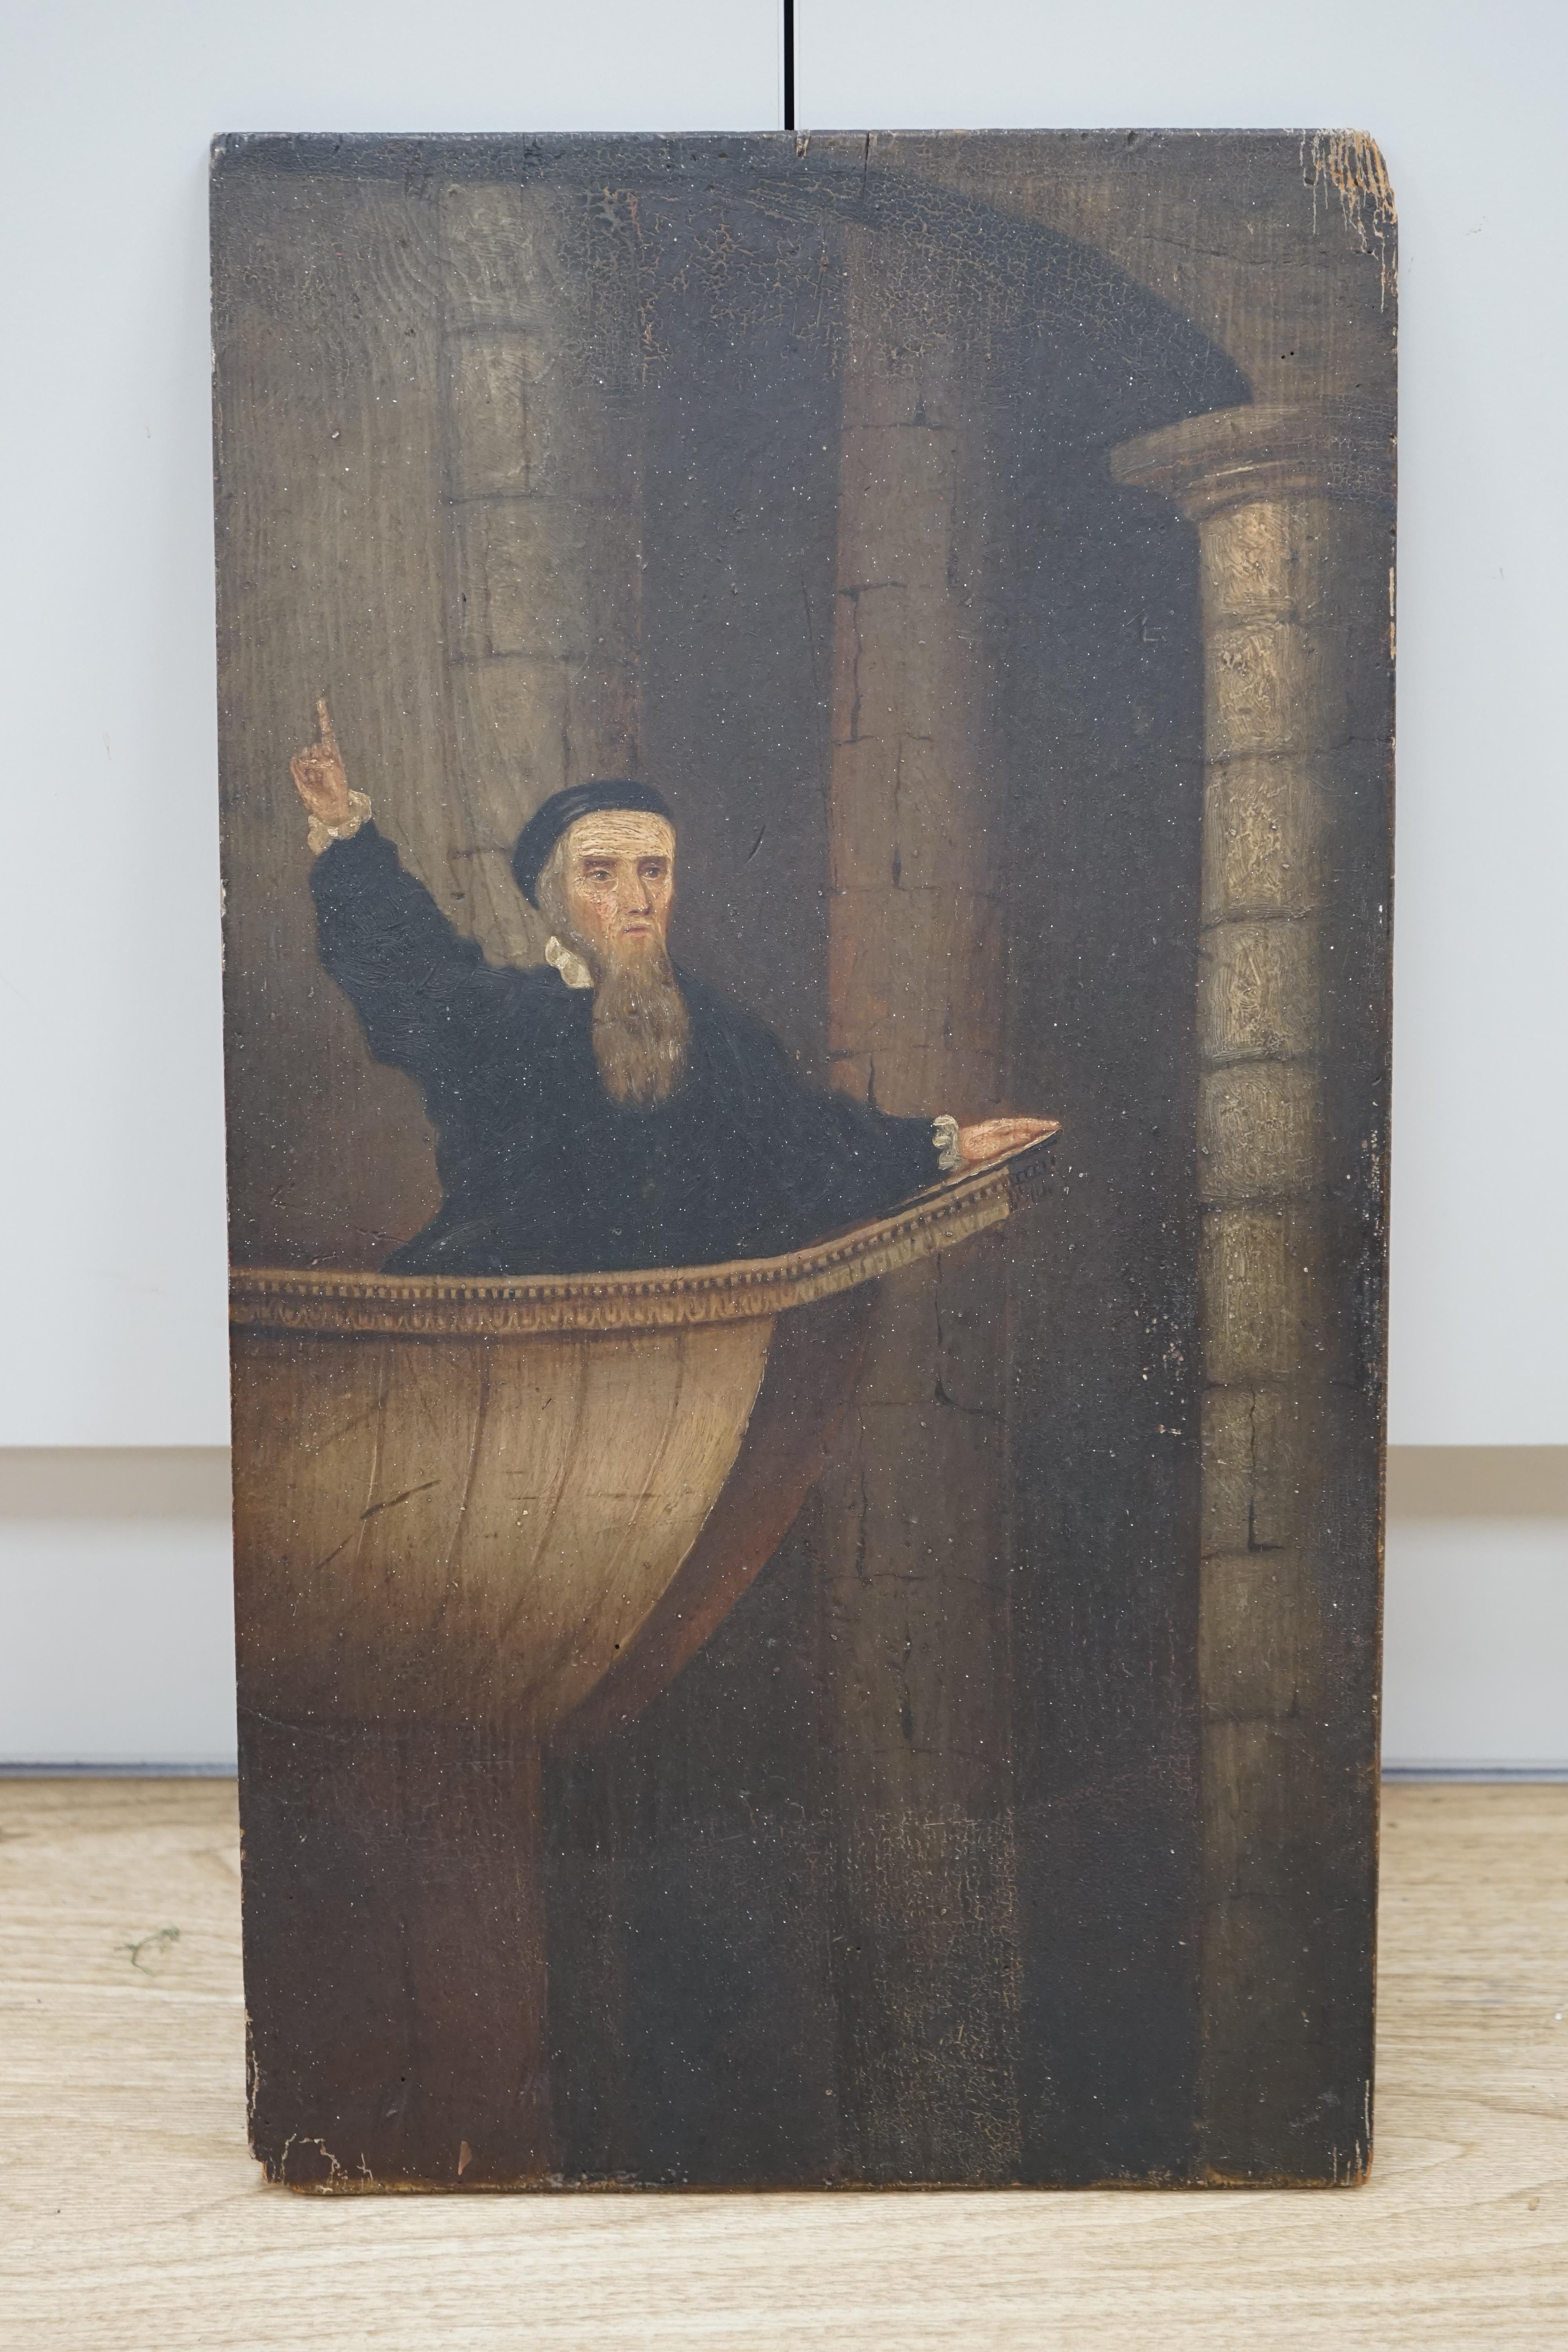 19th century oil on wood panel, John Knox (Scottish c.1514-1572) preaching, indistinctly inscribed in ink verso, 58 x 32cm, unframed. Condition - poor to fair